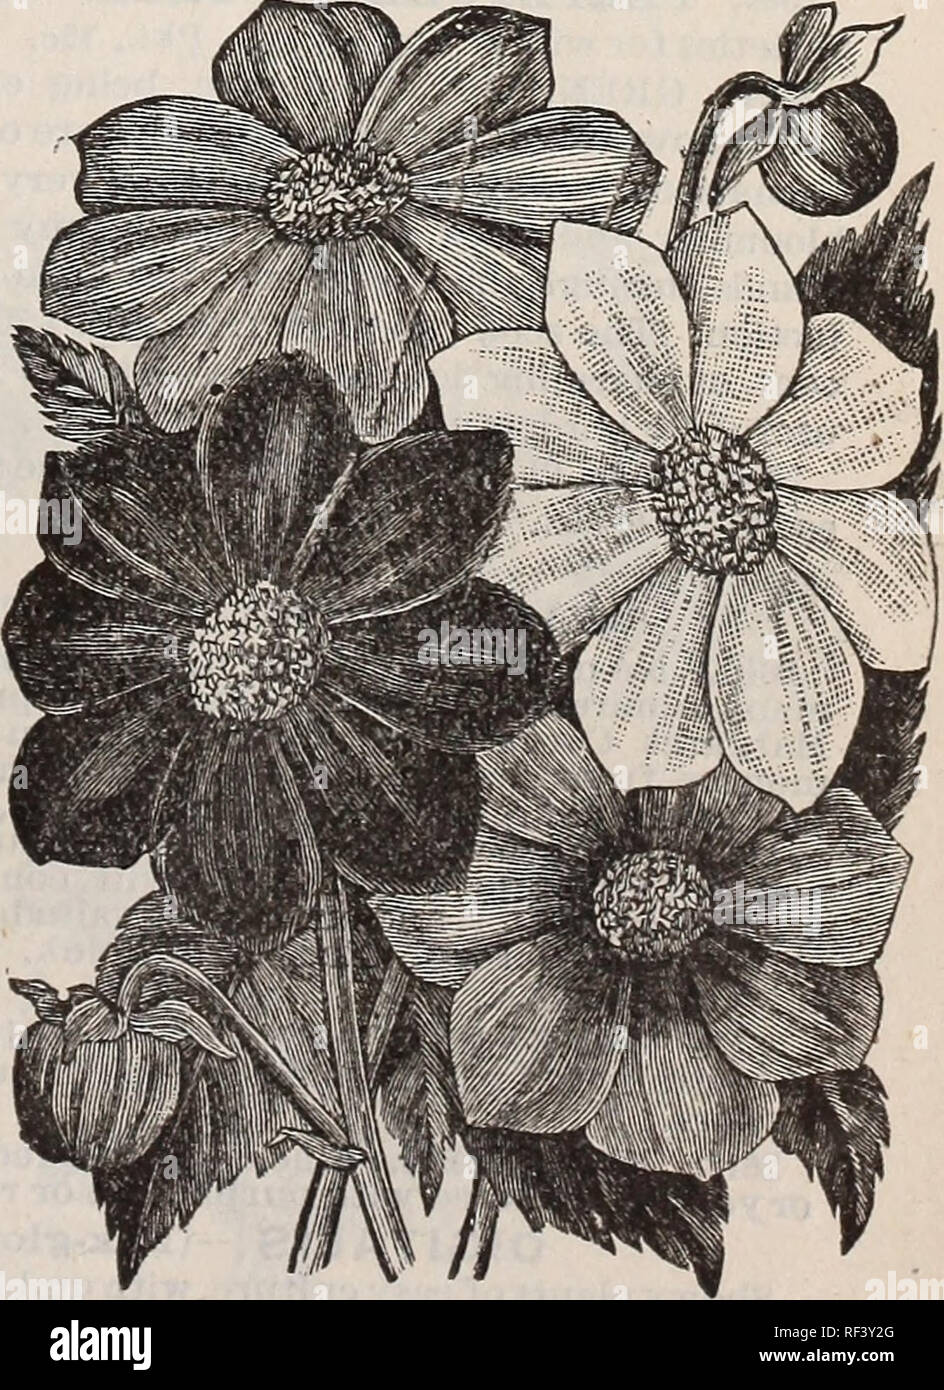 . Novelties and specialties for 1897. Nursery stock Illinois Chicago Catalogs; Seeds Varieties Catalogs; Flowers Seeds Catalogs; Bulbs Plants Catalogs; Flowering shrubs Catalogs. Almost everyone admires the Dahlia and we yearly sell thousands of tubers and pot plants of it. Few seem aware that it can be grown easily from seed and will bloom the first season. 2 to 4 ft. H. H. P. 2524. Large-flowering- Double. Sure to produce some splendid flowers being saved from extra choice sorts. Pkt., 10c. 2525. Pompone Double. From selected small flowers, extra choice mixed. Pkt., 10c. 2526. Single Mixed.  Stock Photo